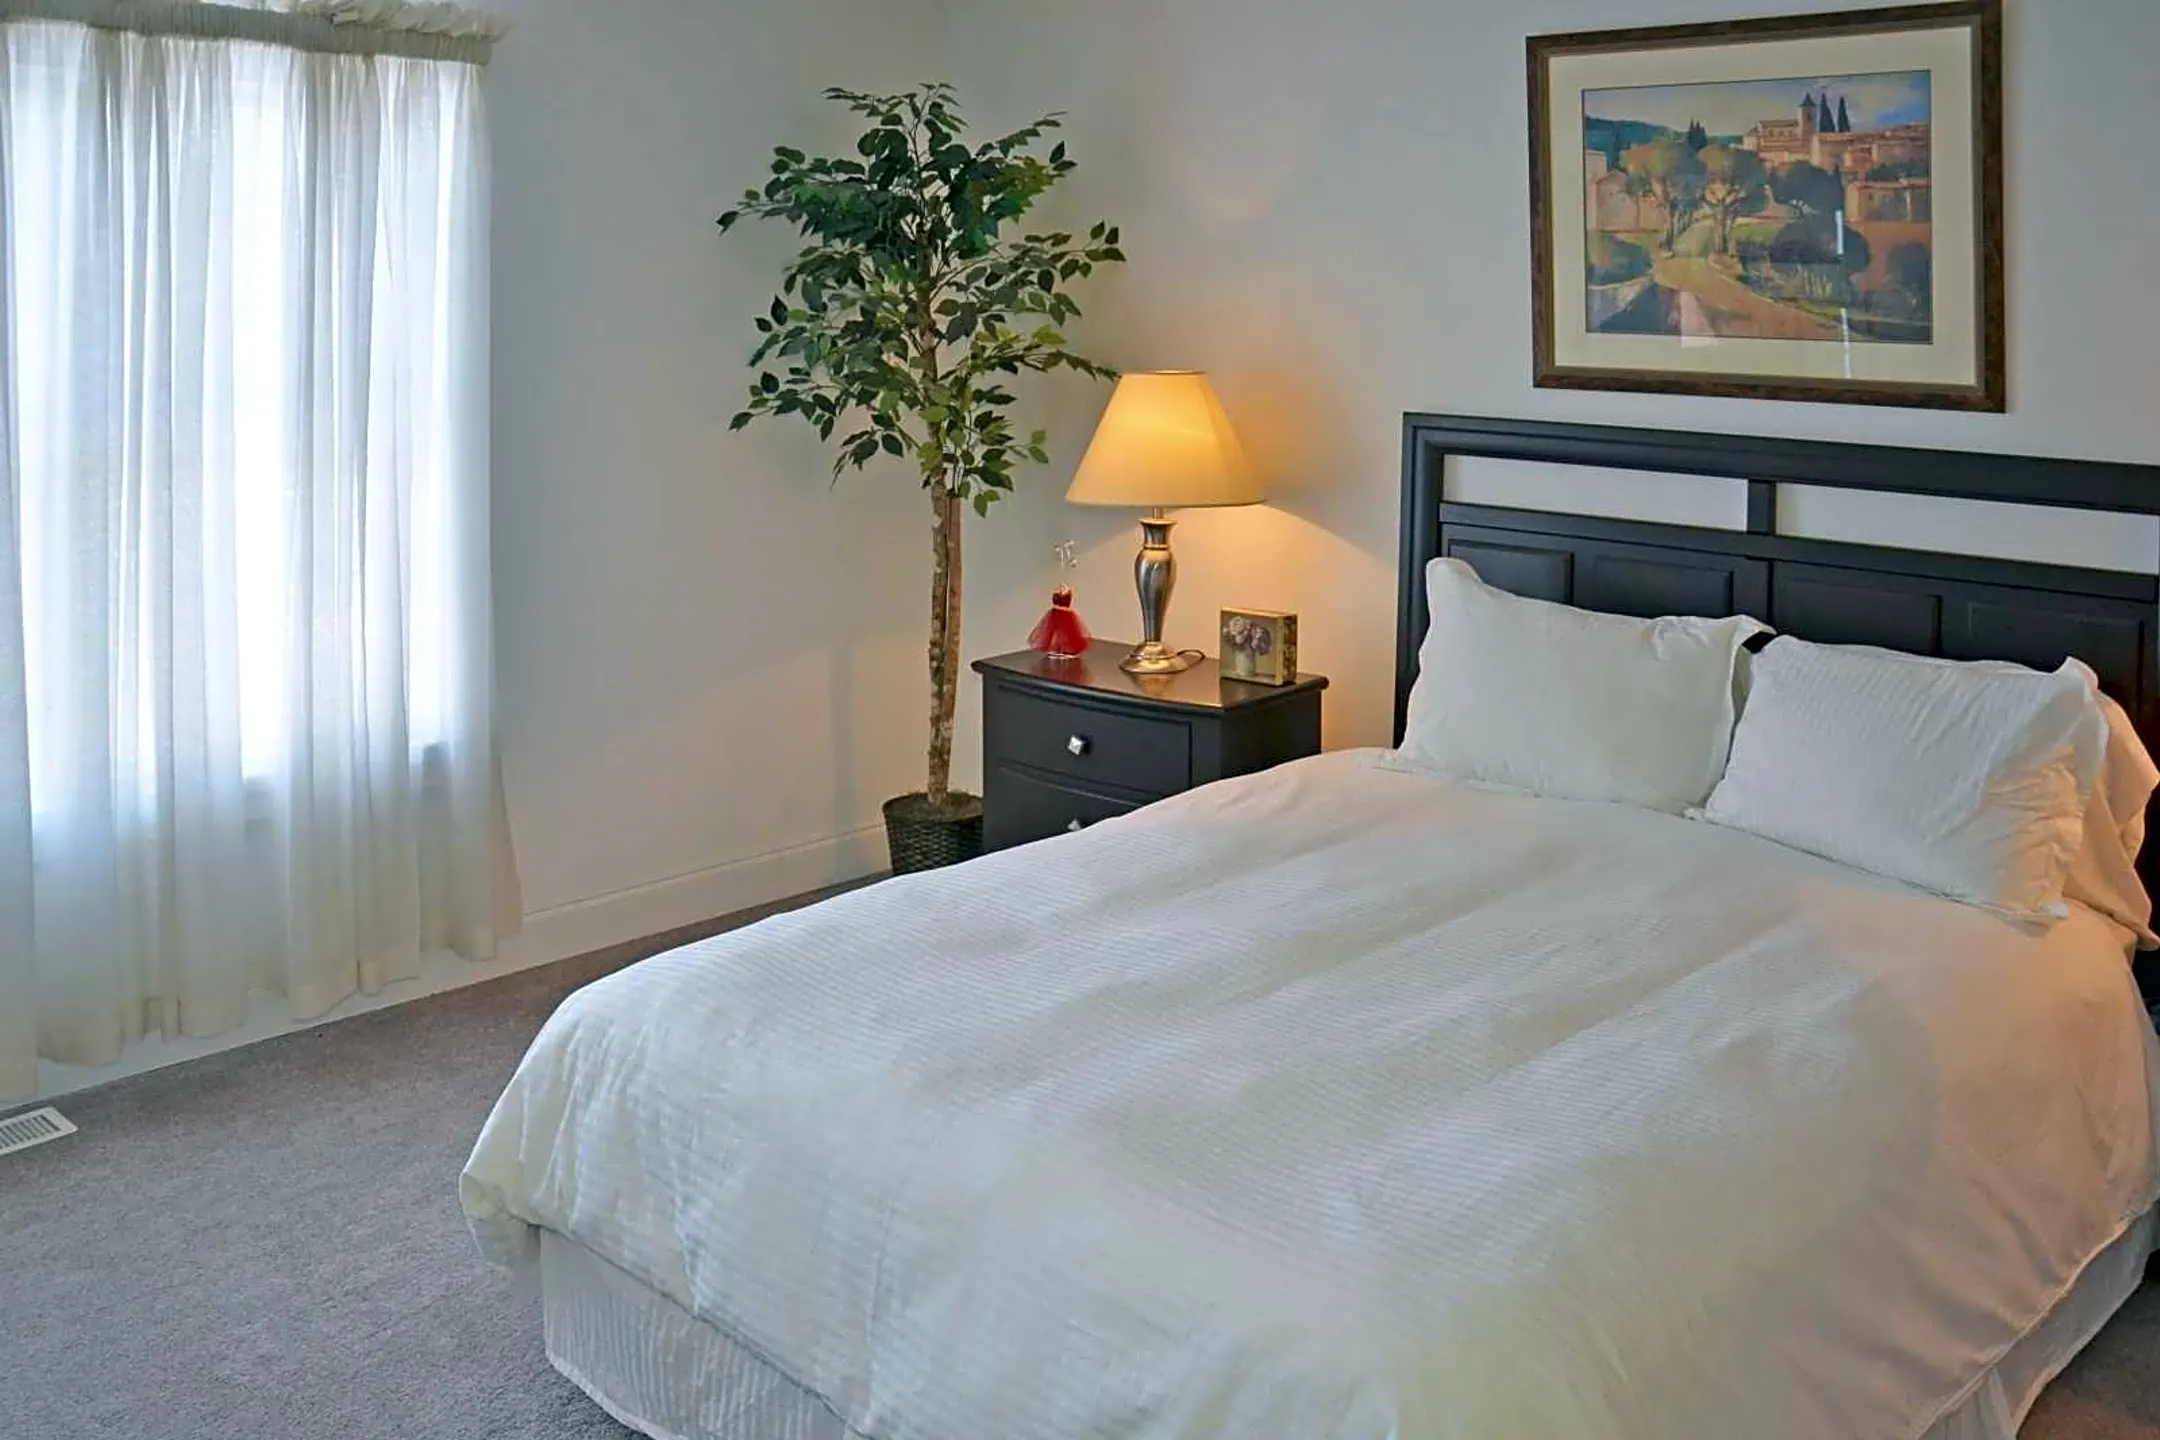 Bedroom - The Fairways Apartments & Townhomes - Thorndale, PA